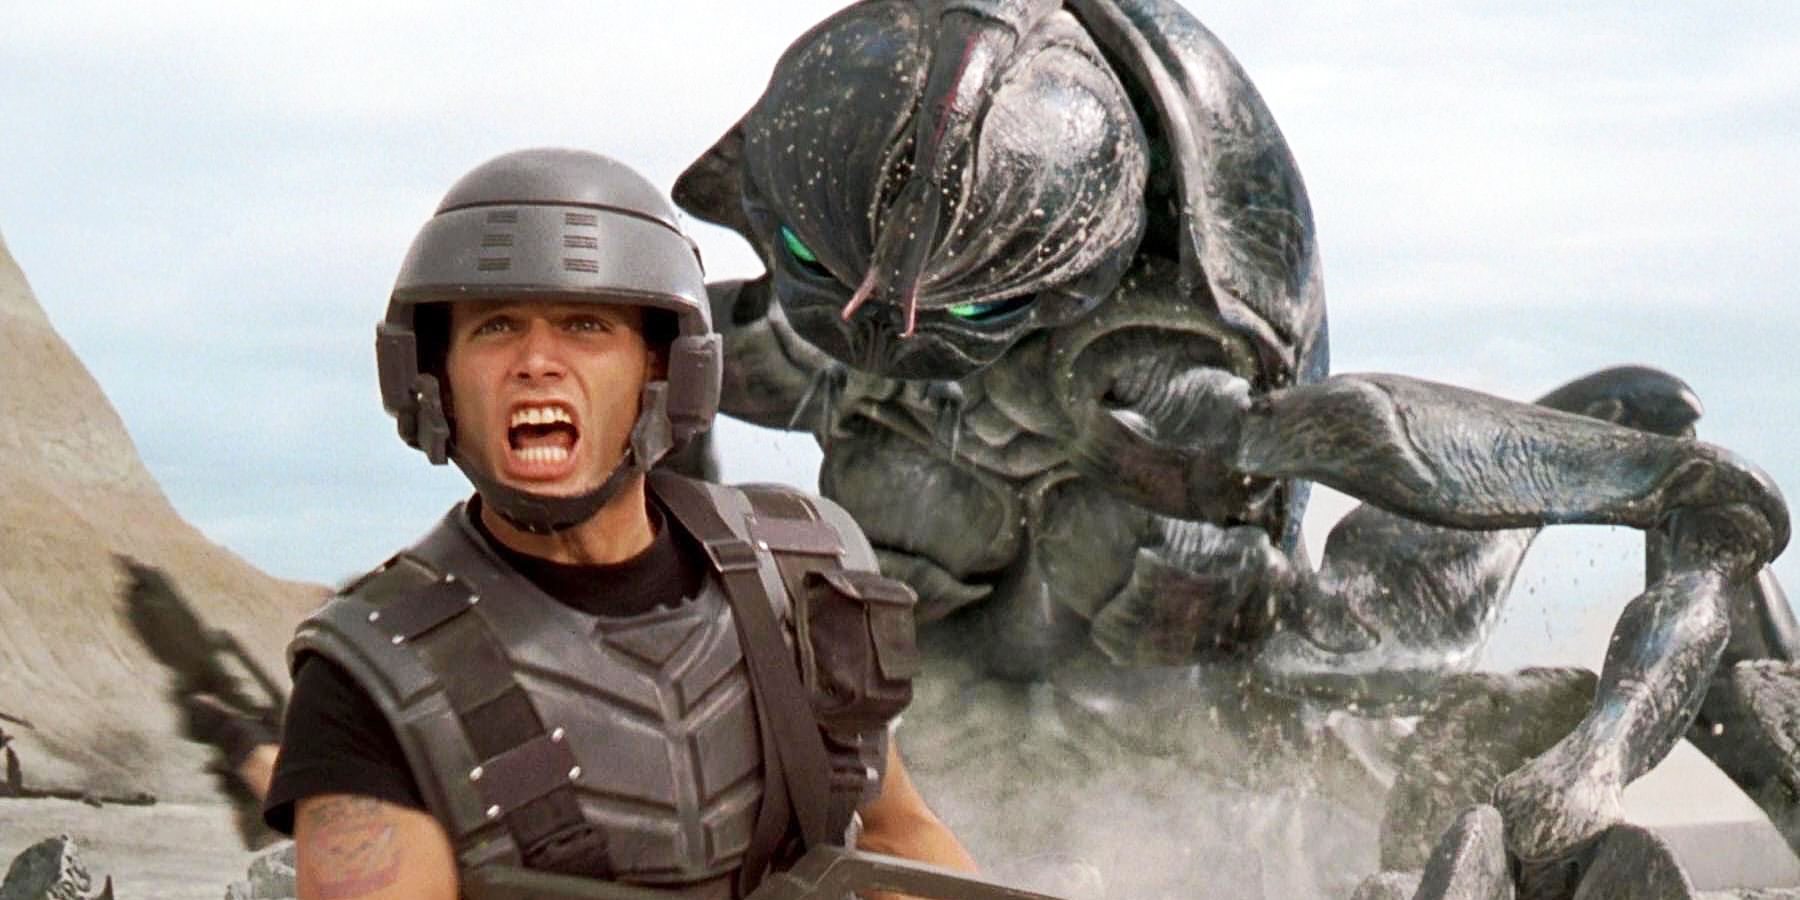 A big bug coming after Johnny Rico in Starship Troopers